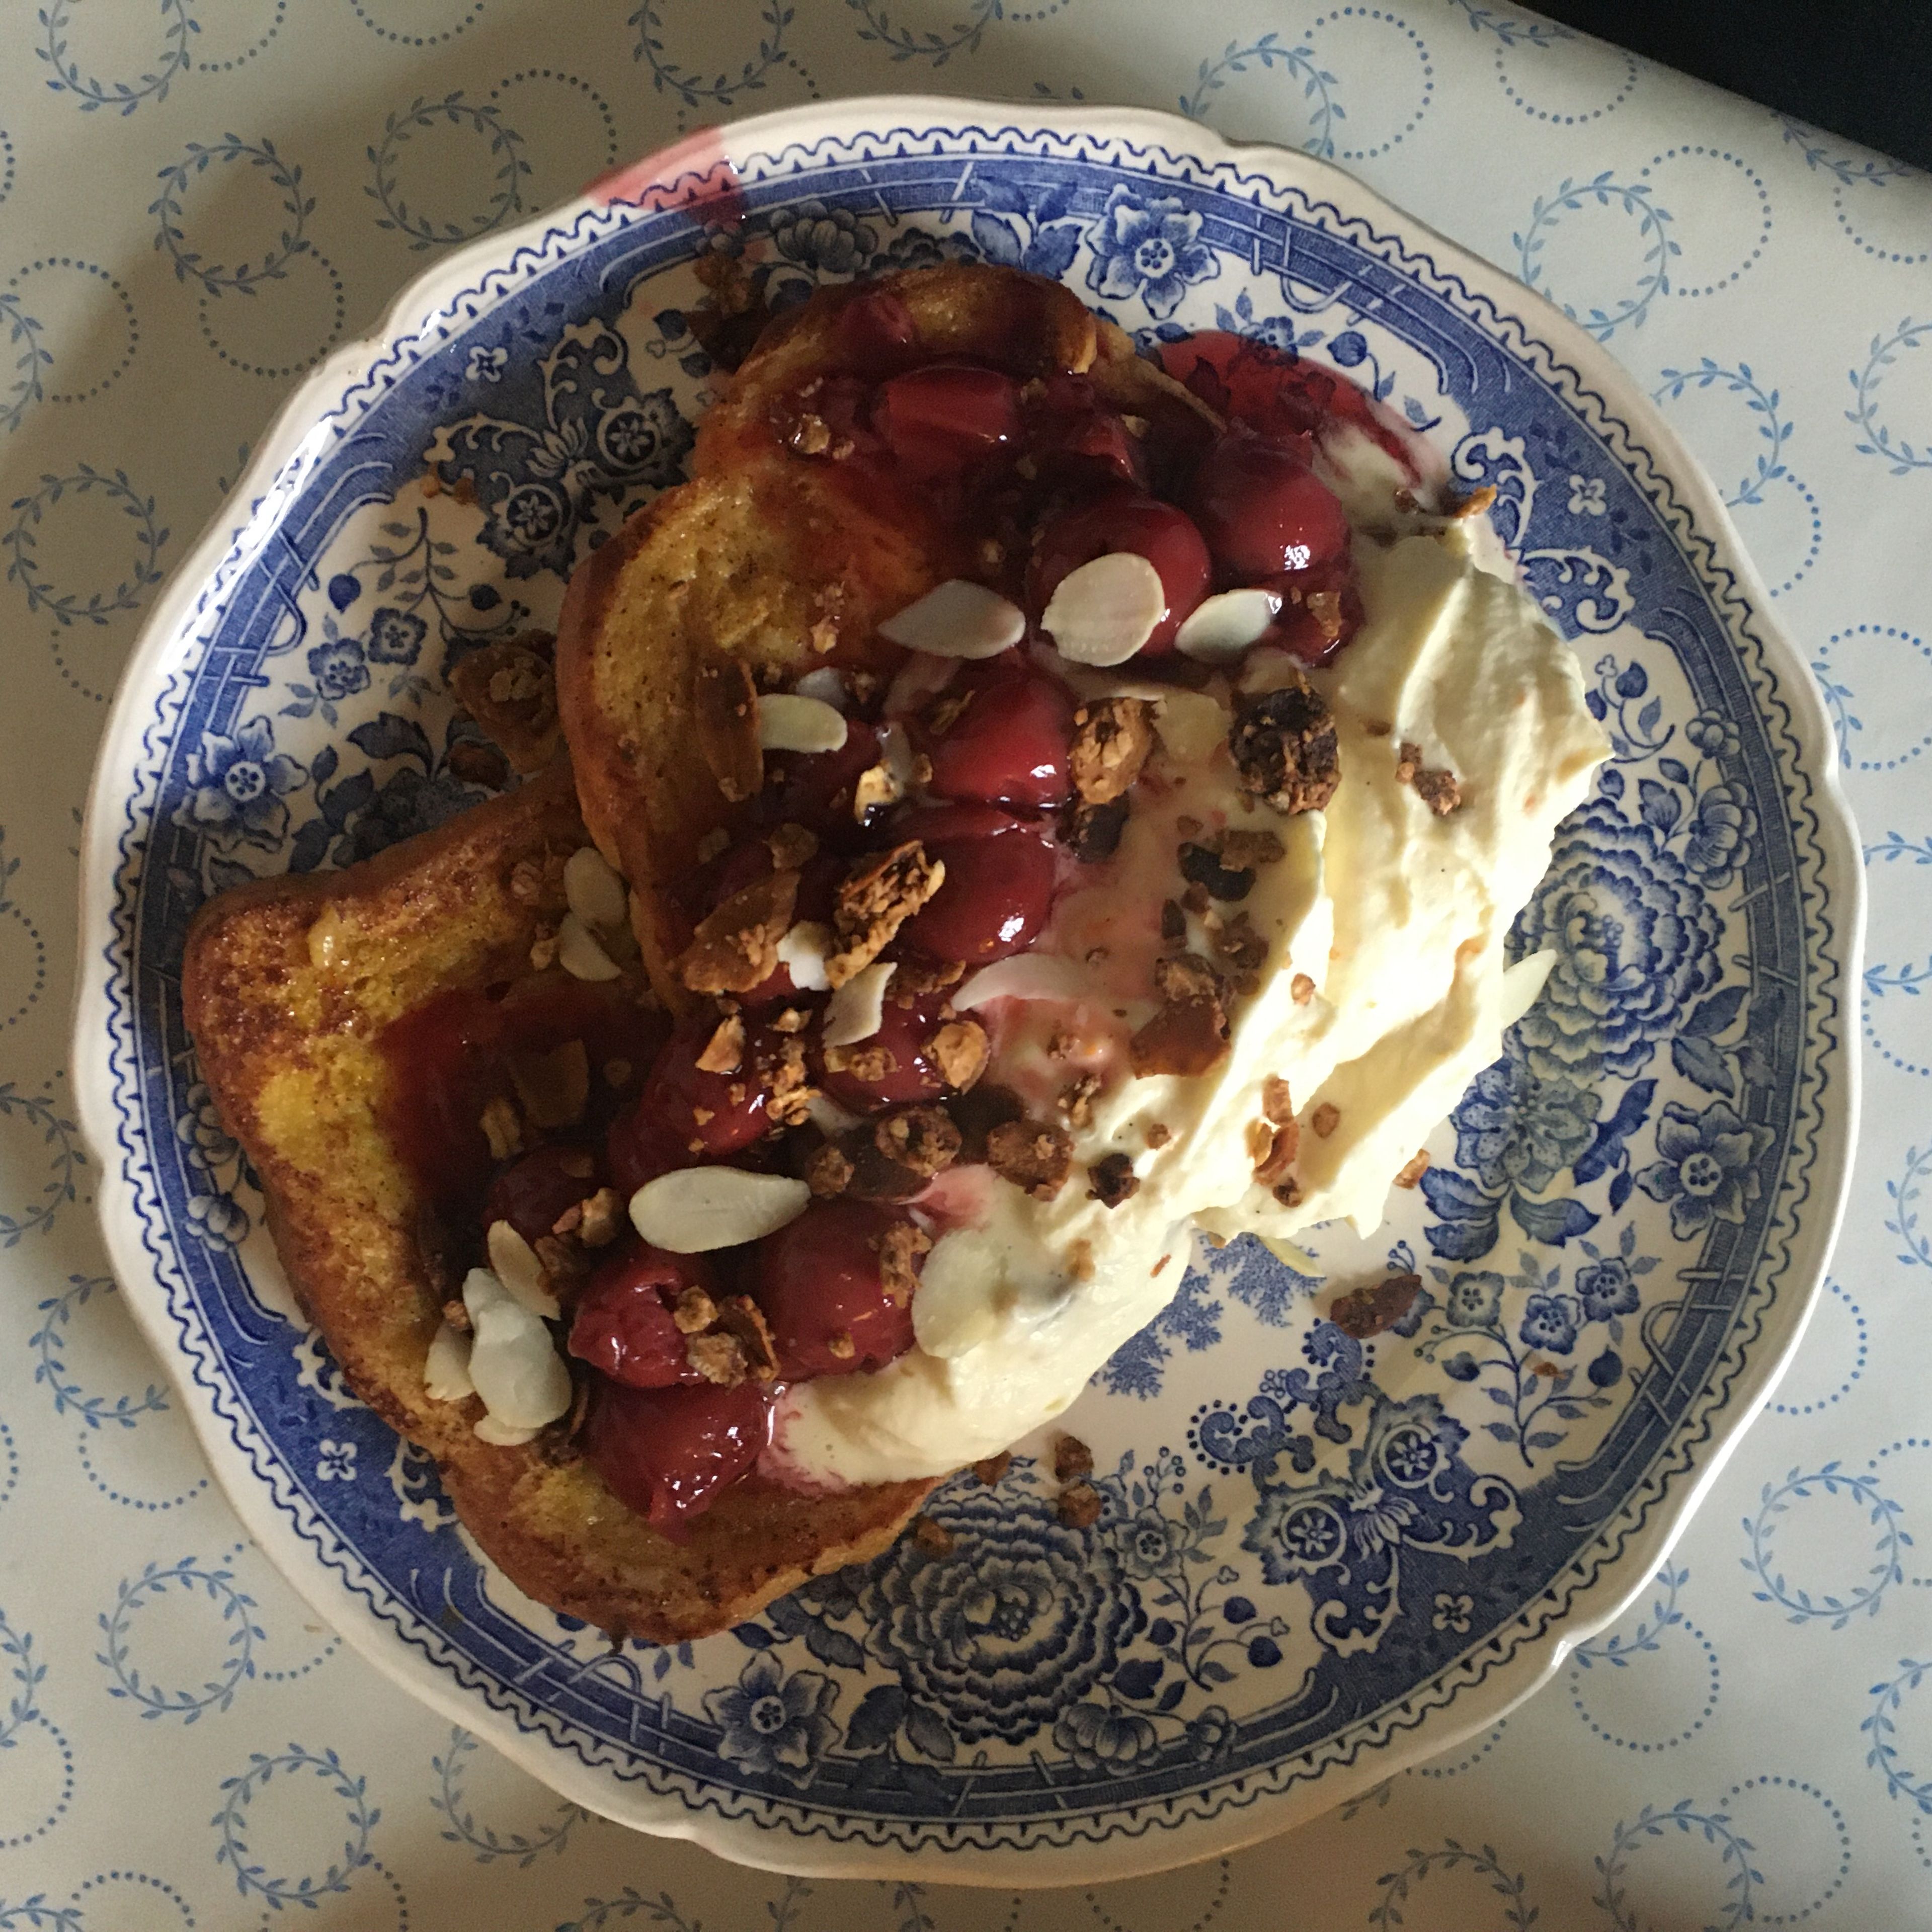 Lay two slices of french toast on a plate, pour a spoon of cream and cherries over and sprinkle the crunch around it. Garnish with mint to make it extra fancy.